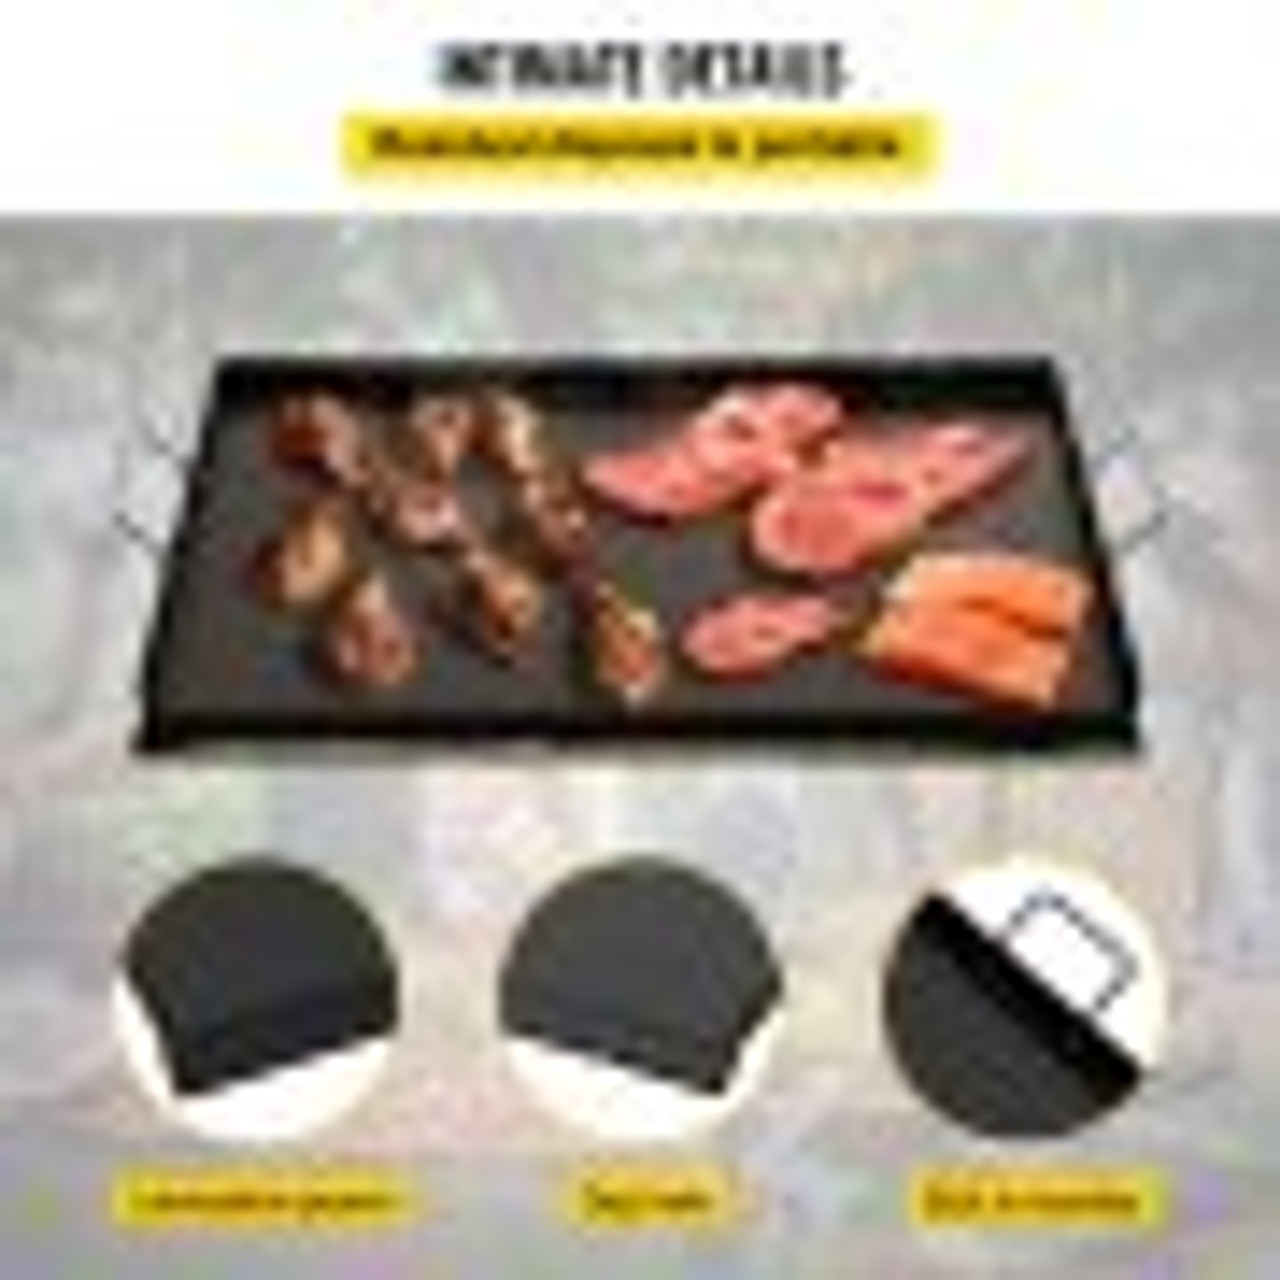 Stainless Steel Griddle,32 X 17 Universal Flat Top Rectangular Plate ,  BBQ Charcoal/Gas Grill with